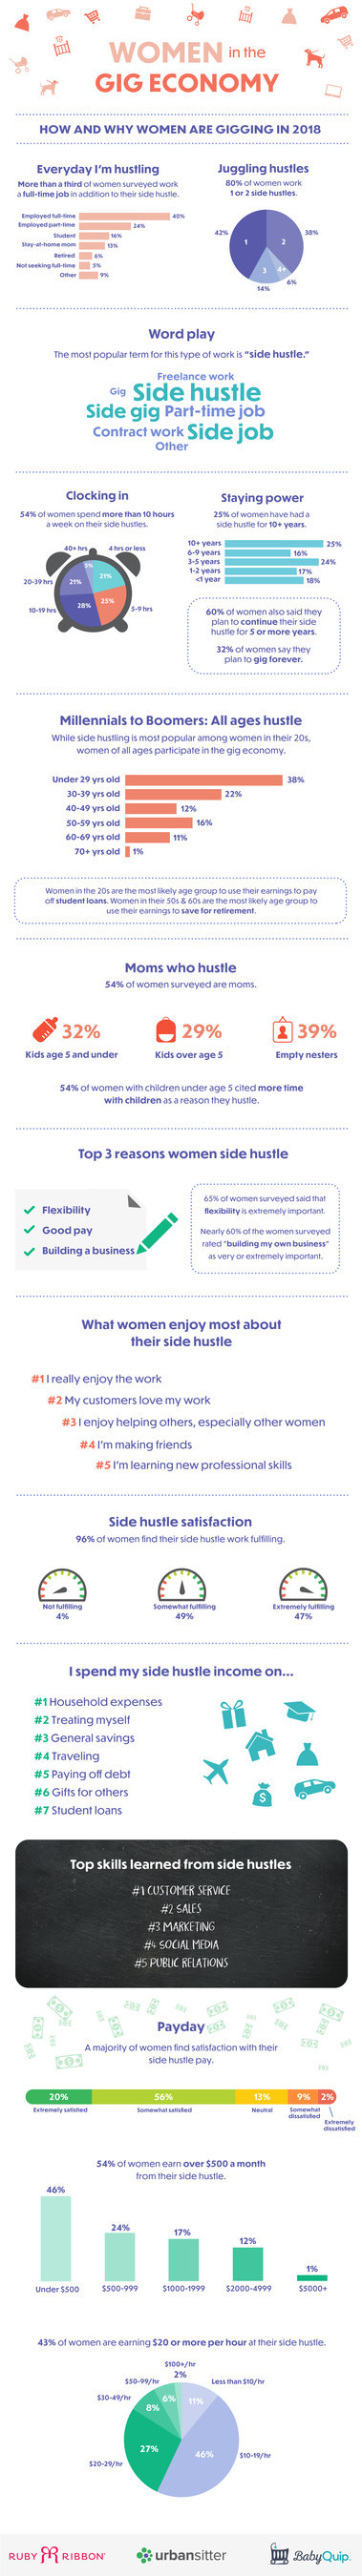 Women_in_the_Gig_Economy_final_Infographic.jpg